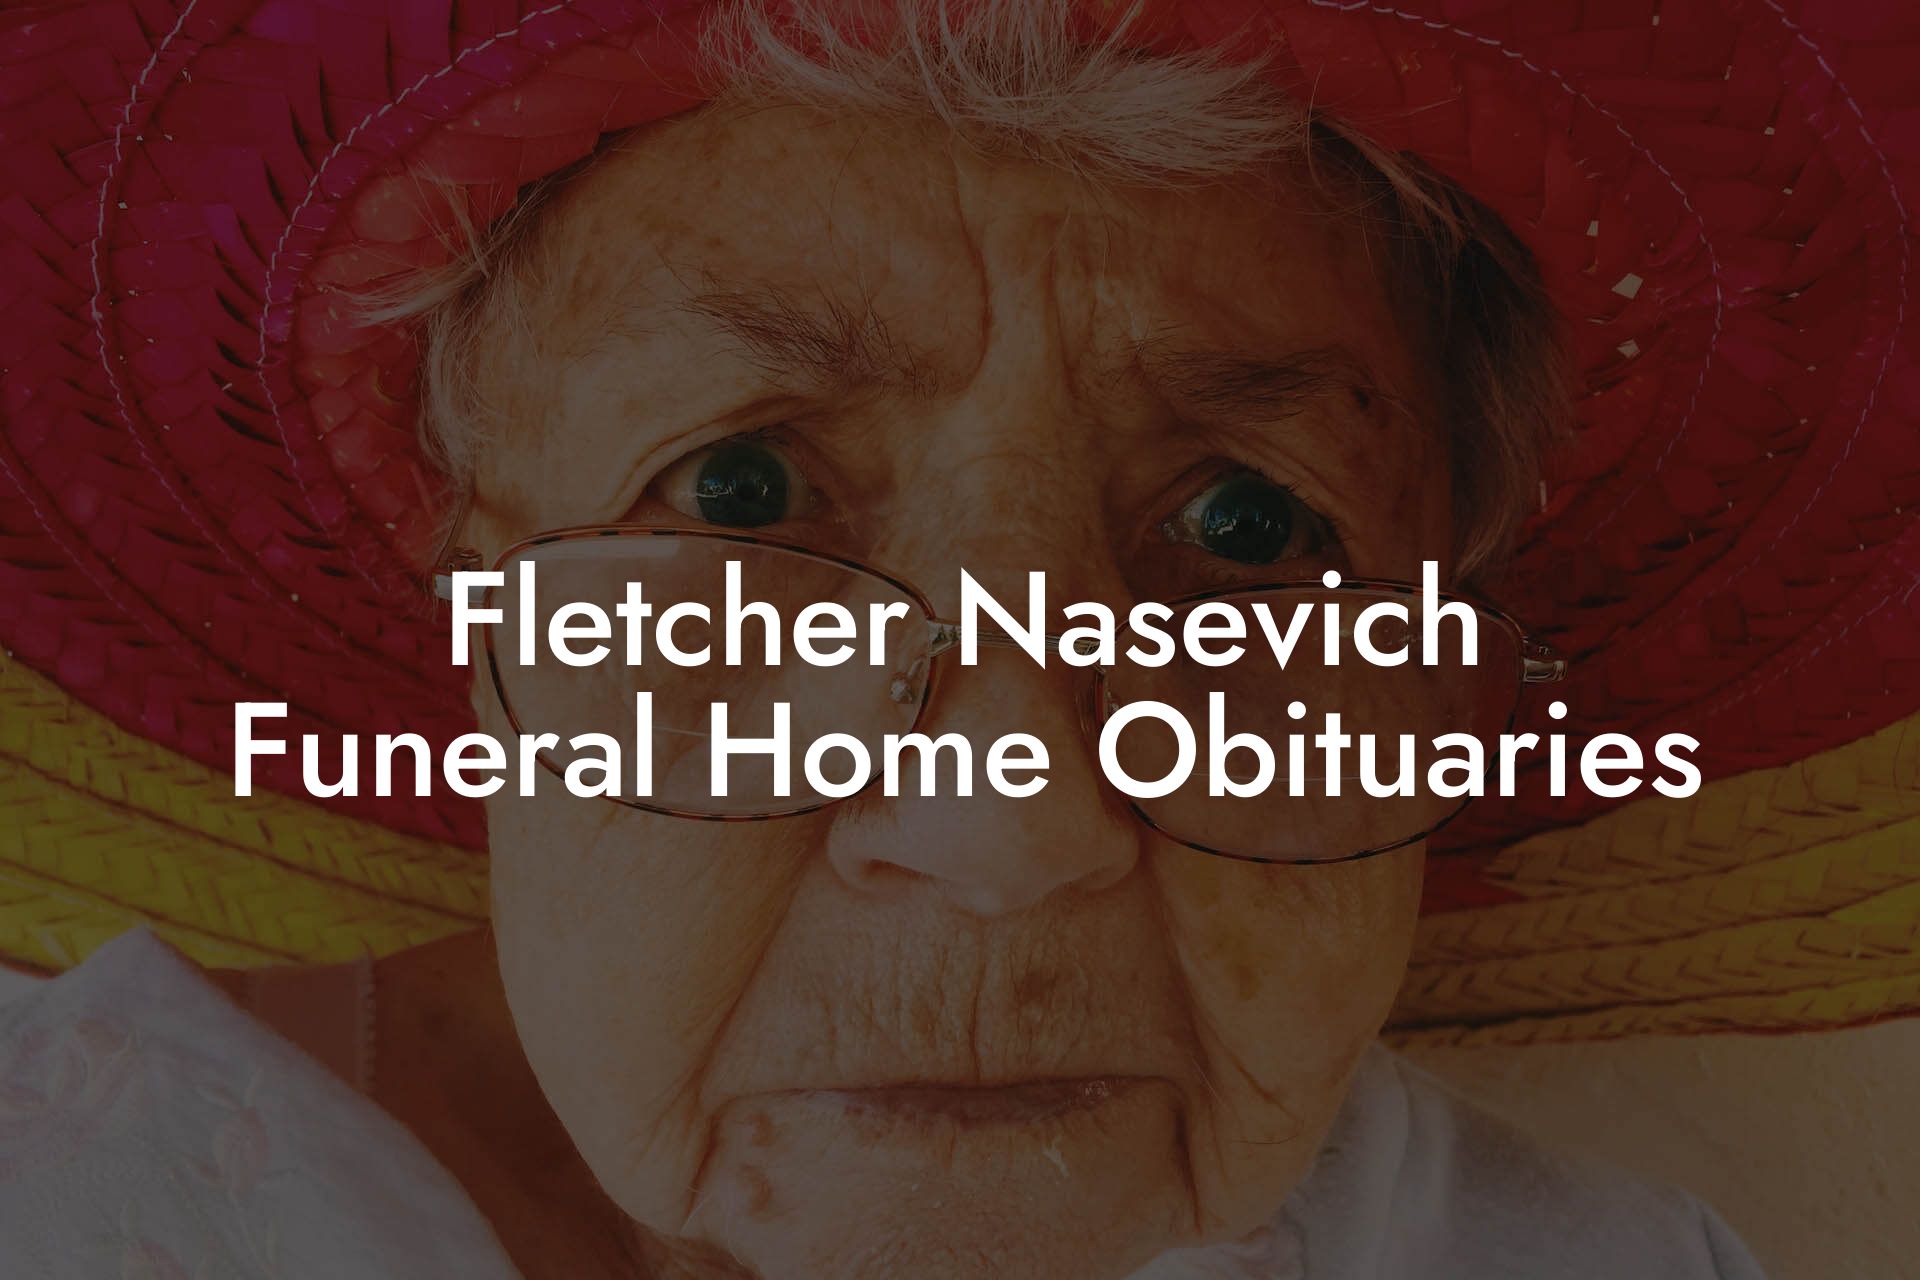 Fletcher Nasevich Funeral Home Obituaries